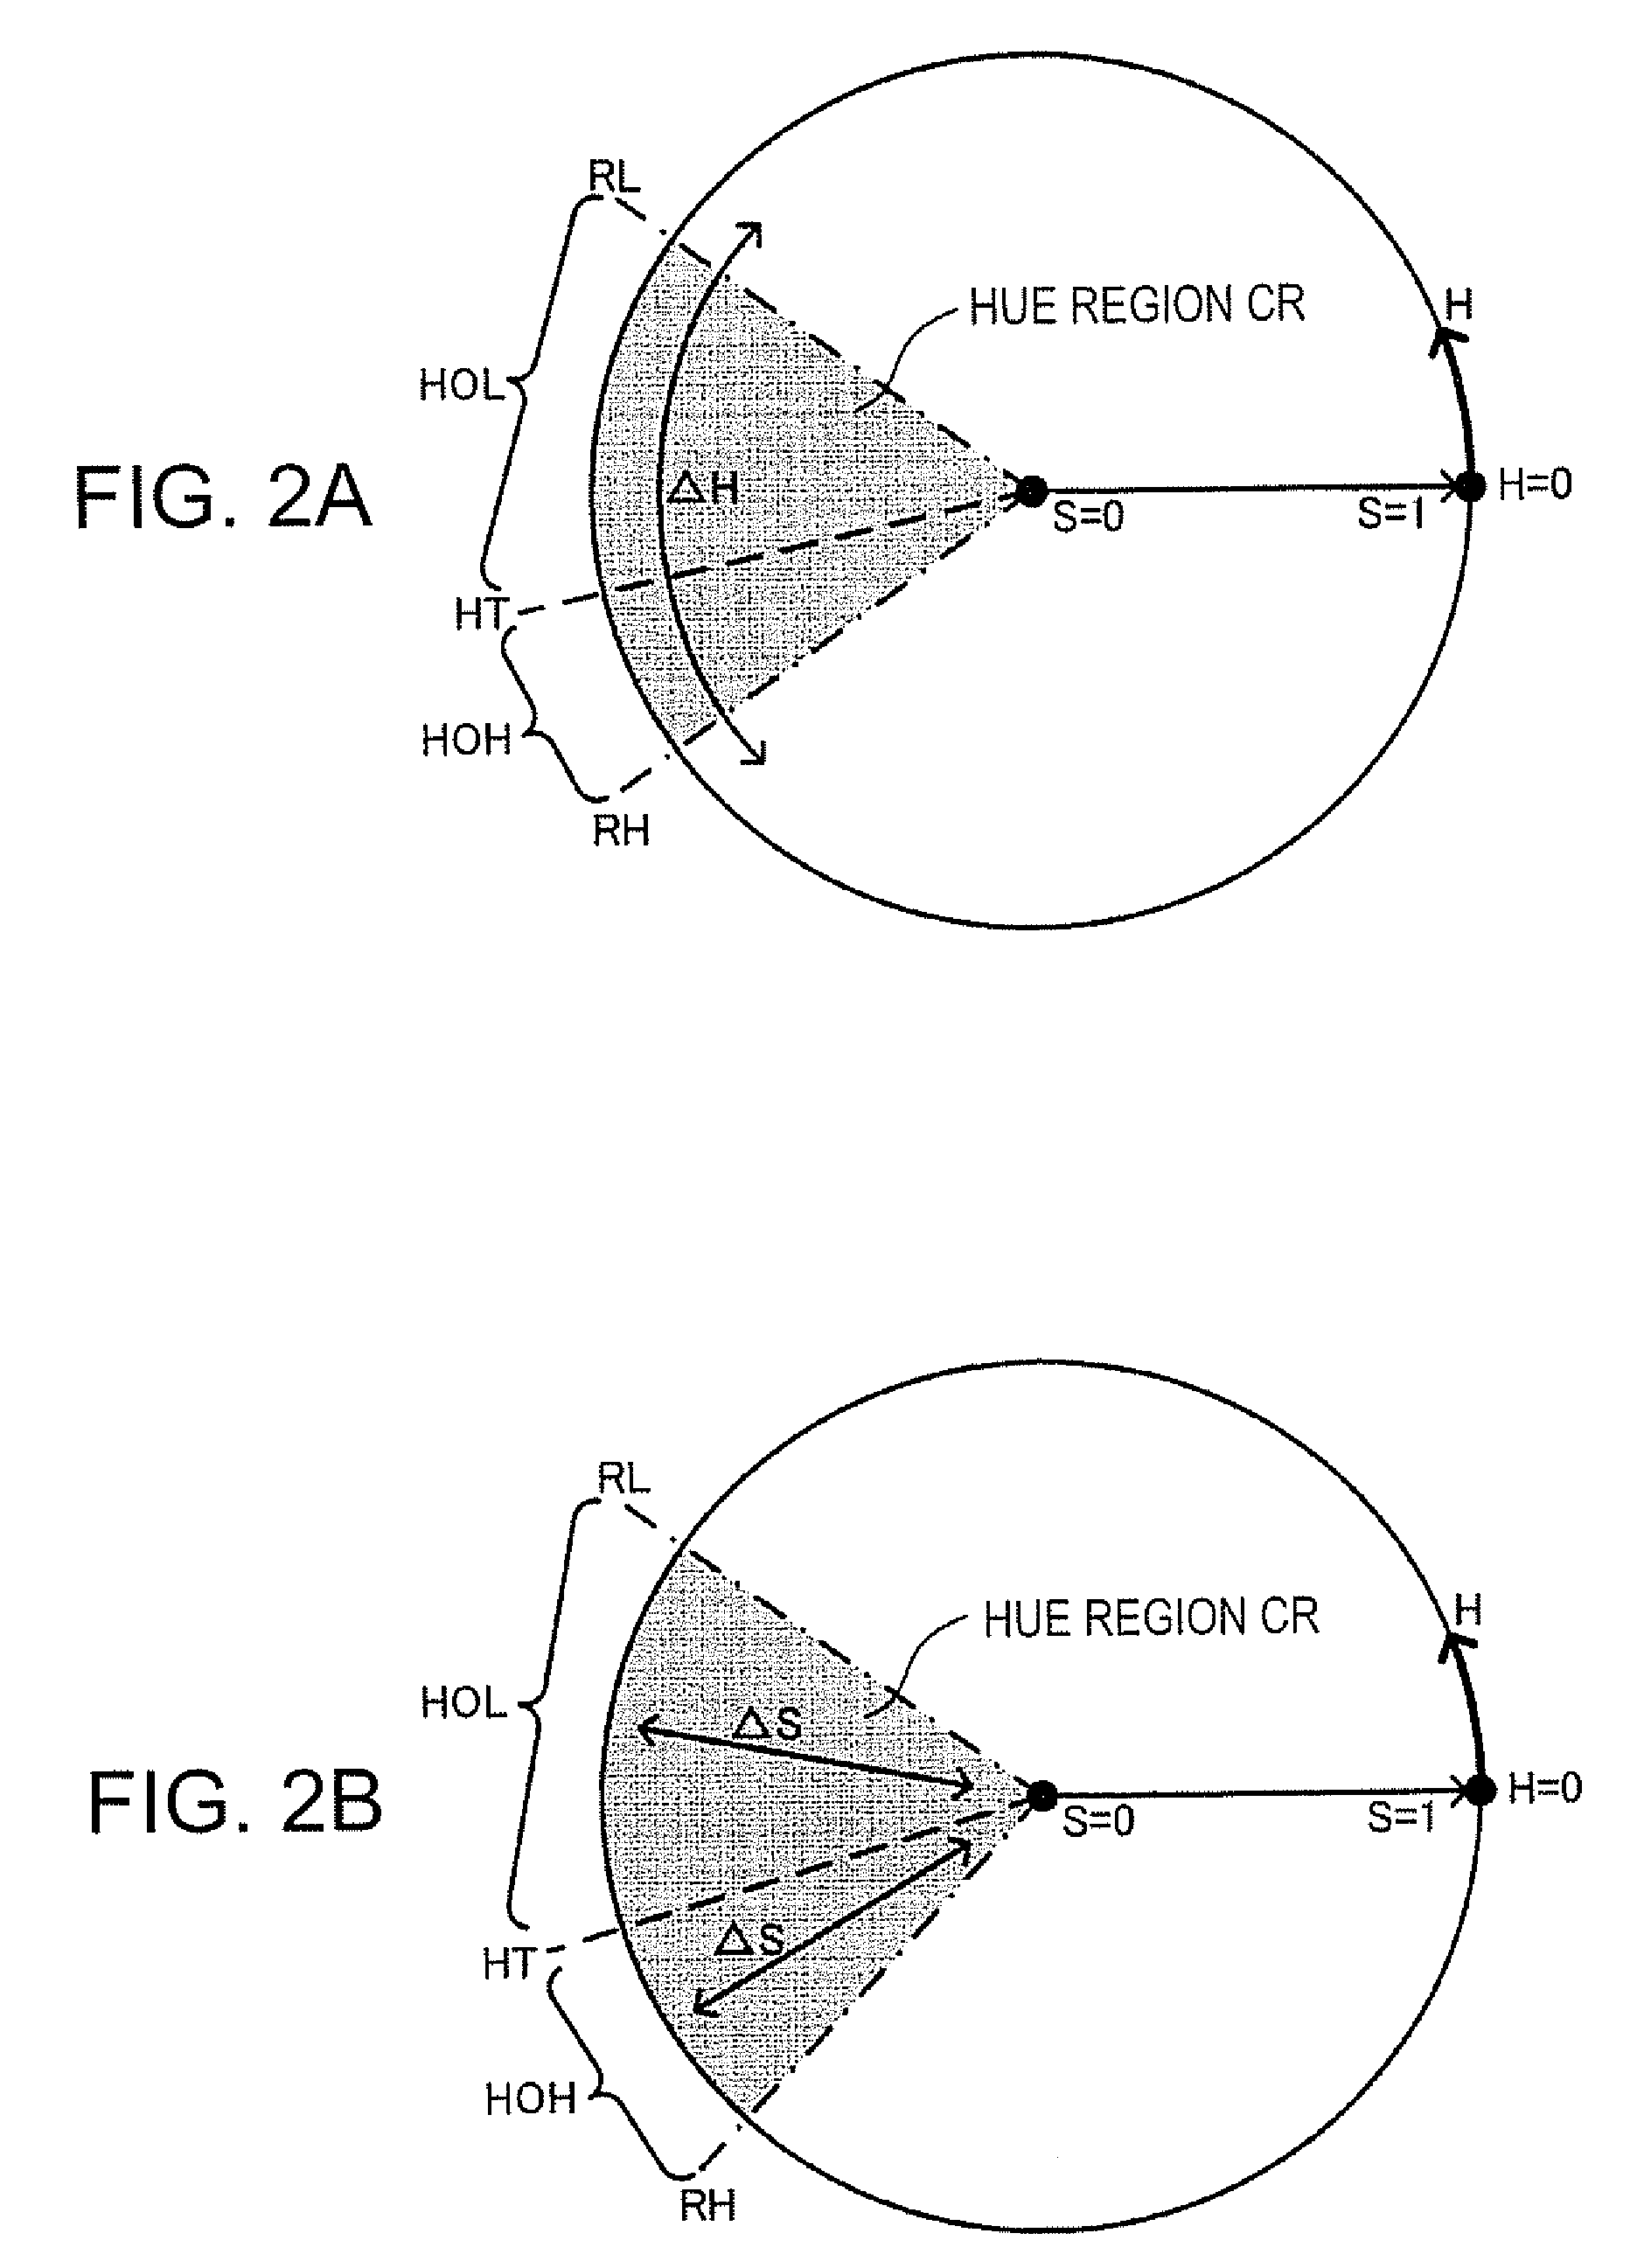 Image processor, integrated circuit device, and electronic apparatus